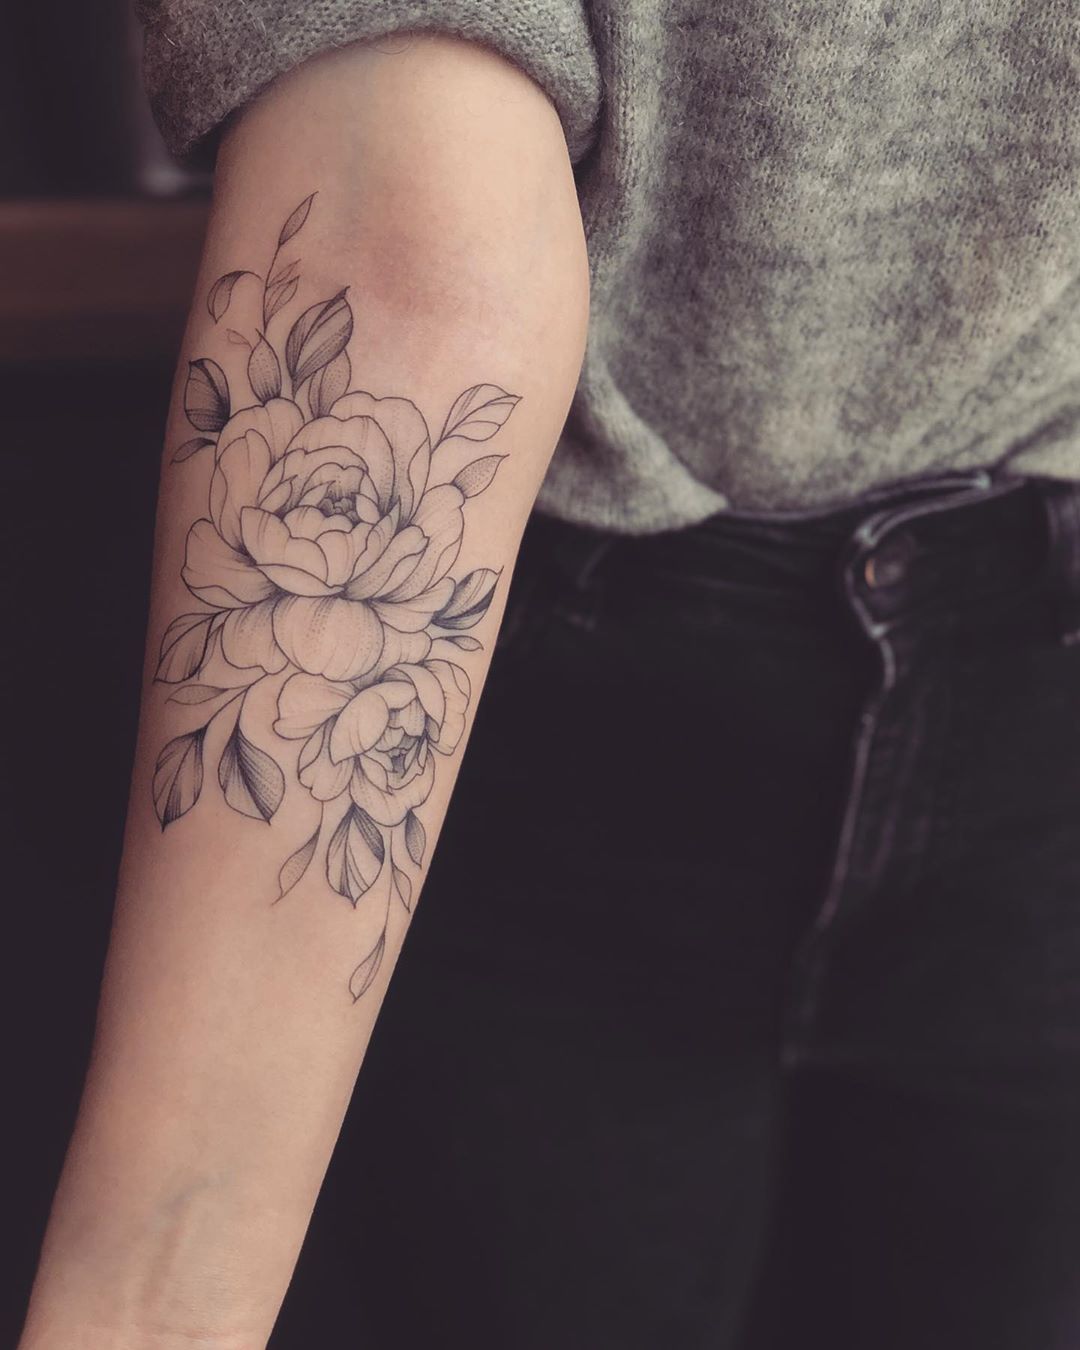 Floral Tattoo by Vanessa